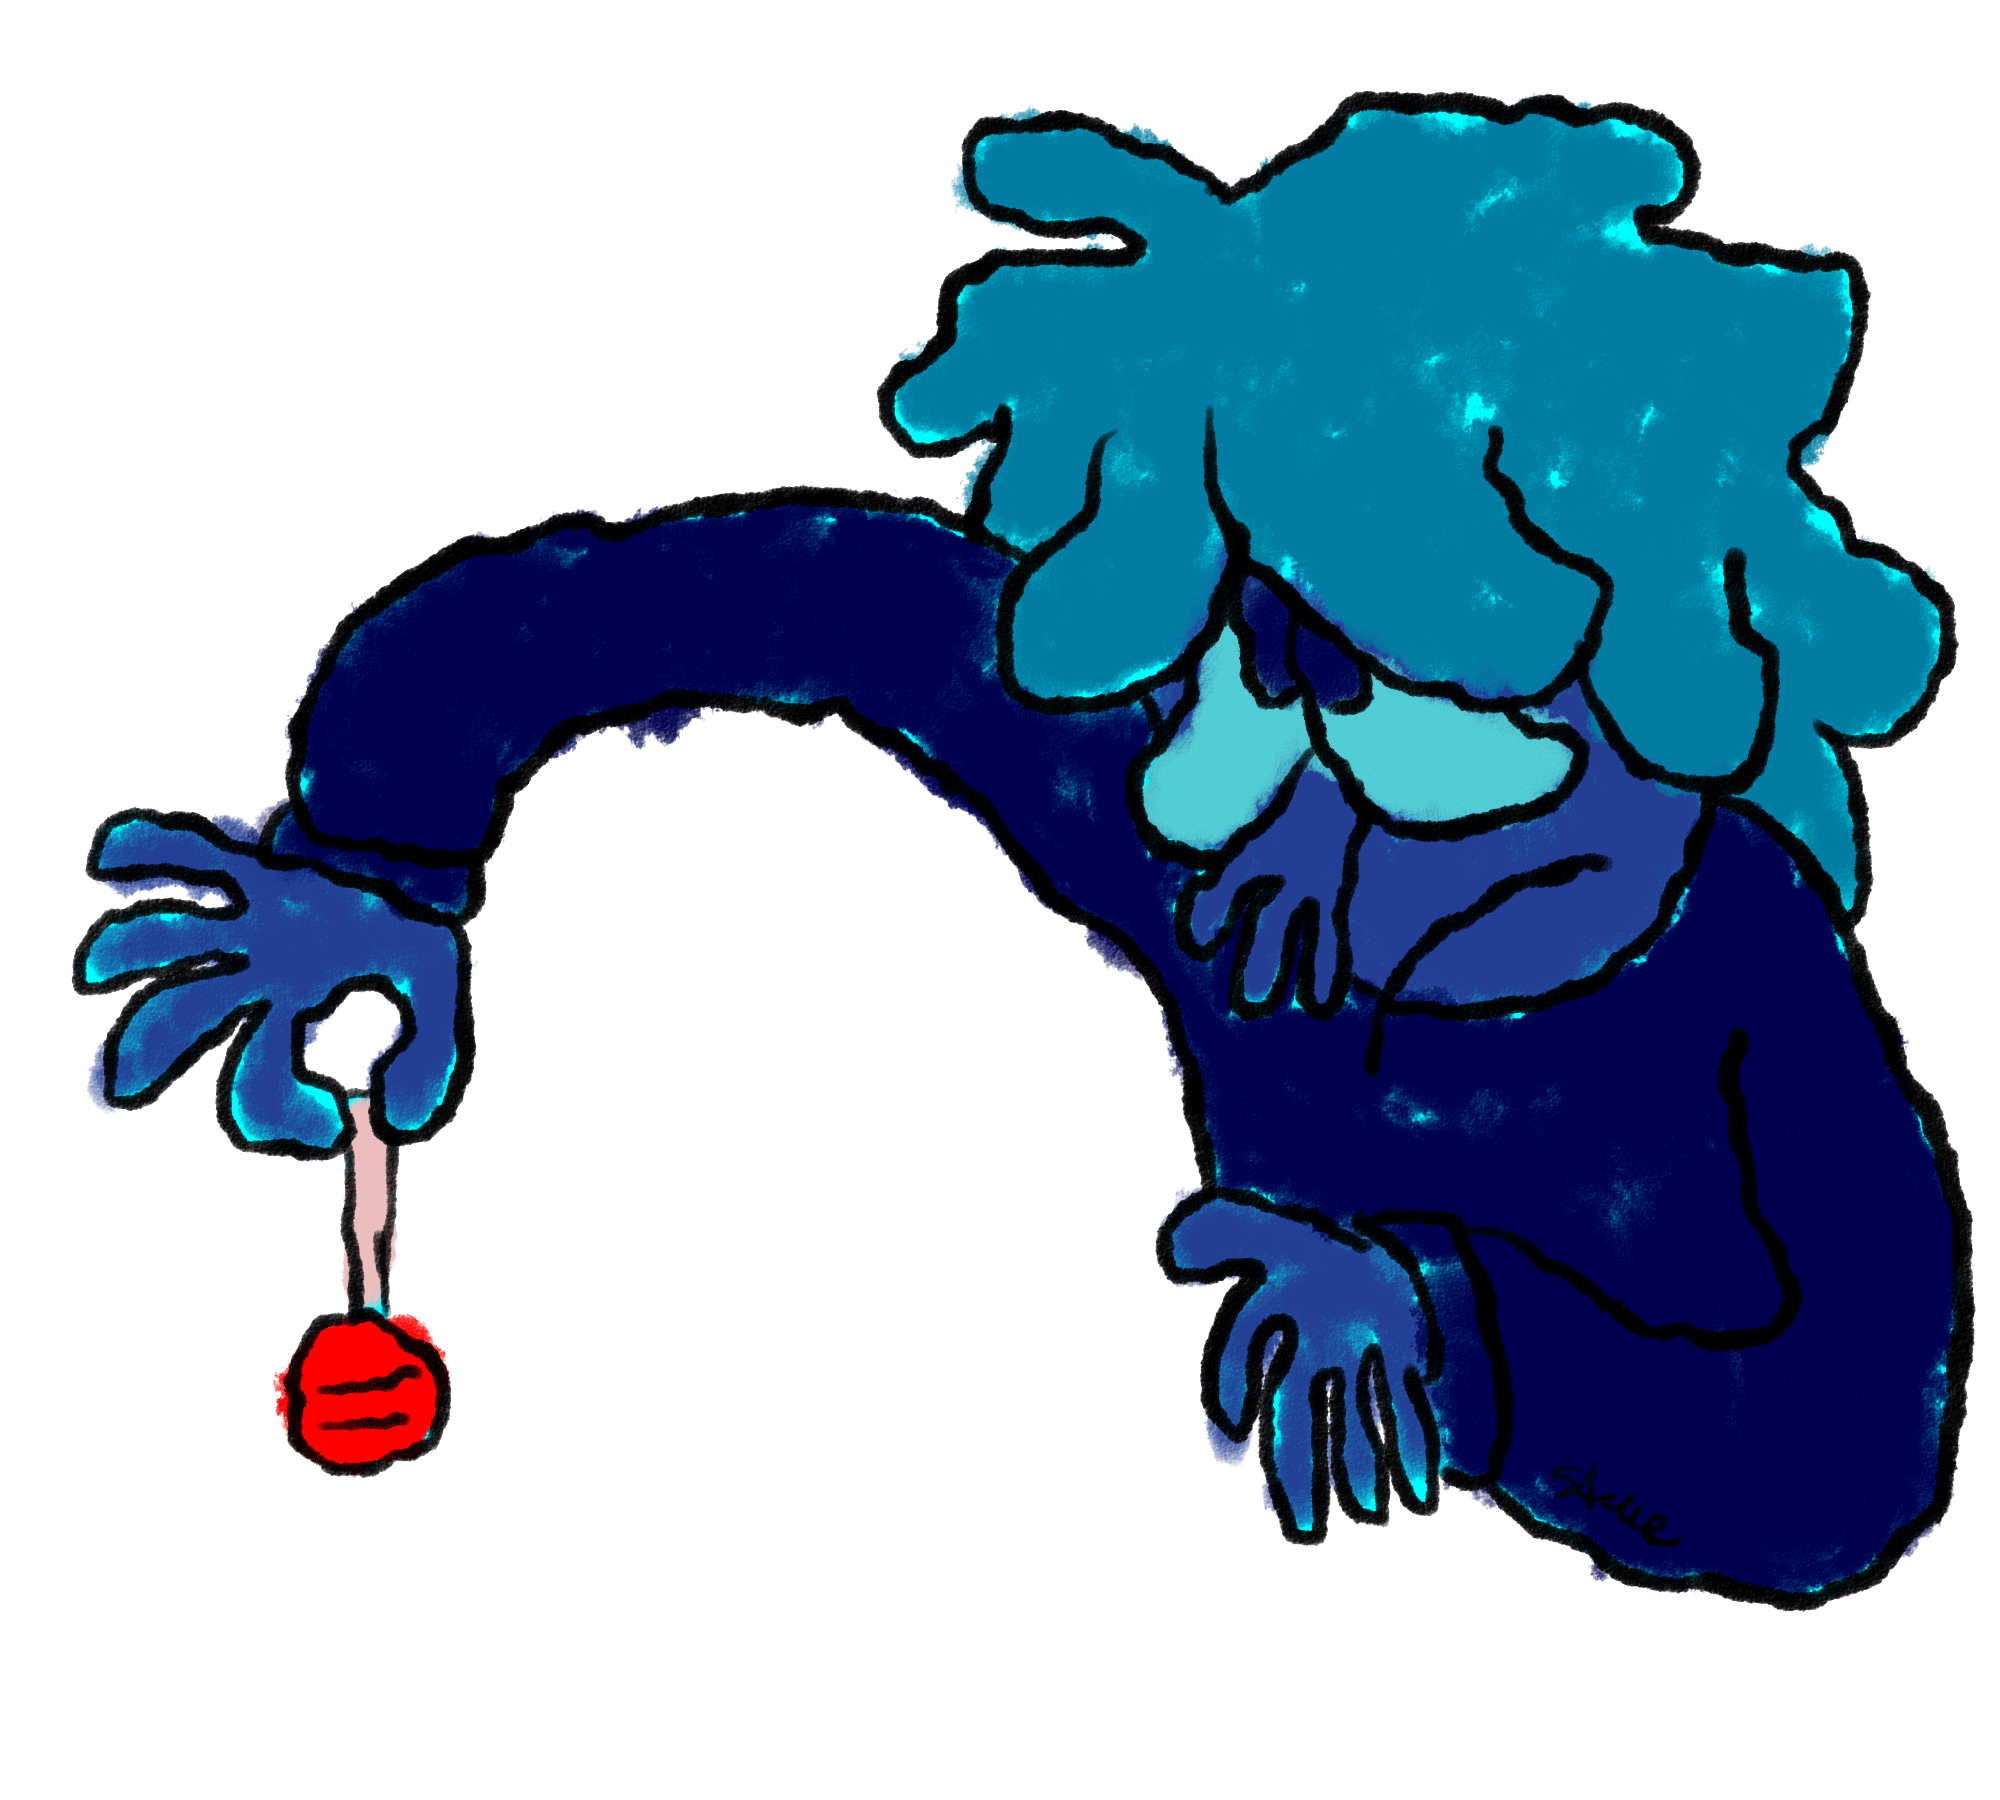 A gif of a very blue boy reluctantly holding a red lollipop from the end of the stick as to where the candy itself is facing the ground. The boy looks quite sad.